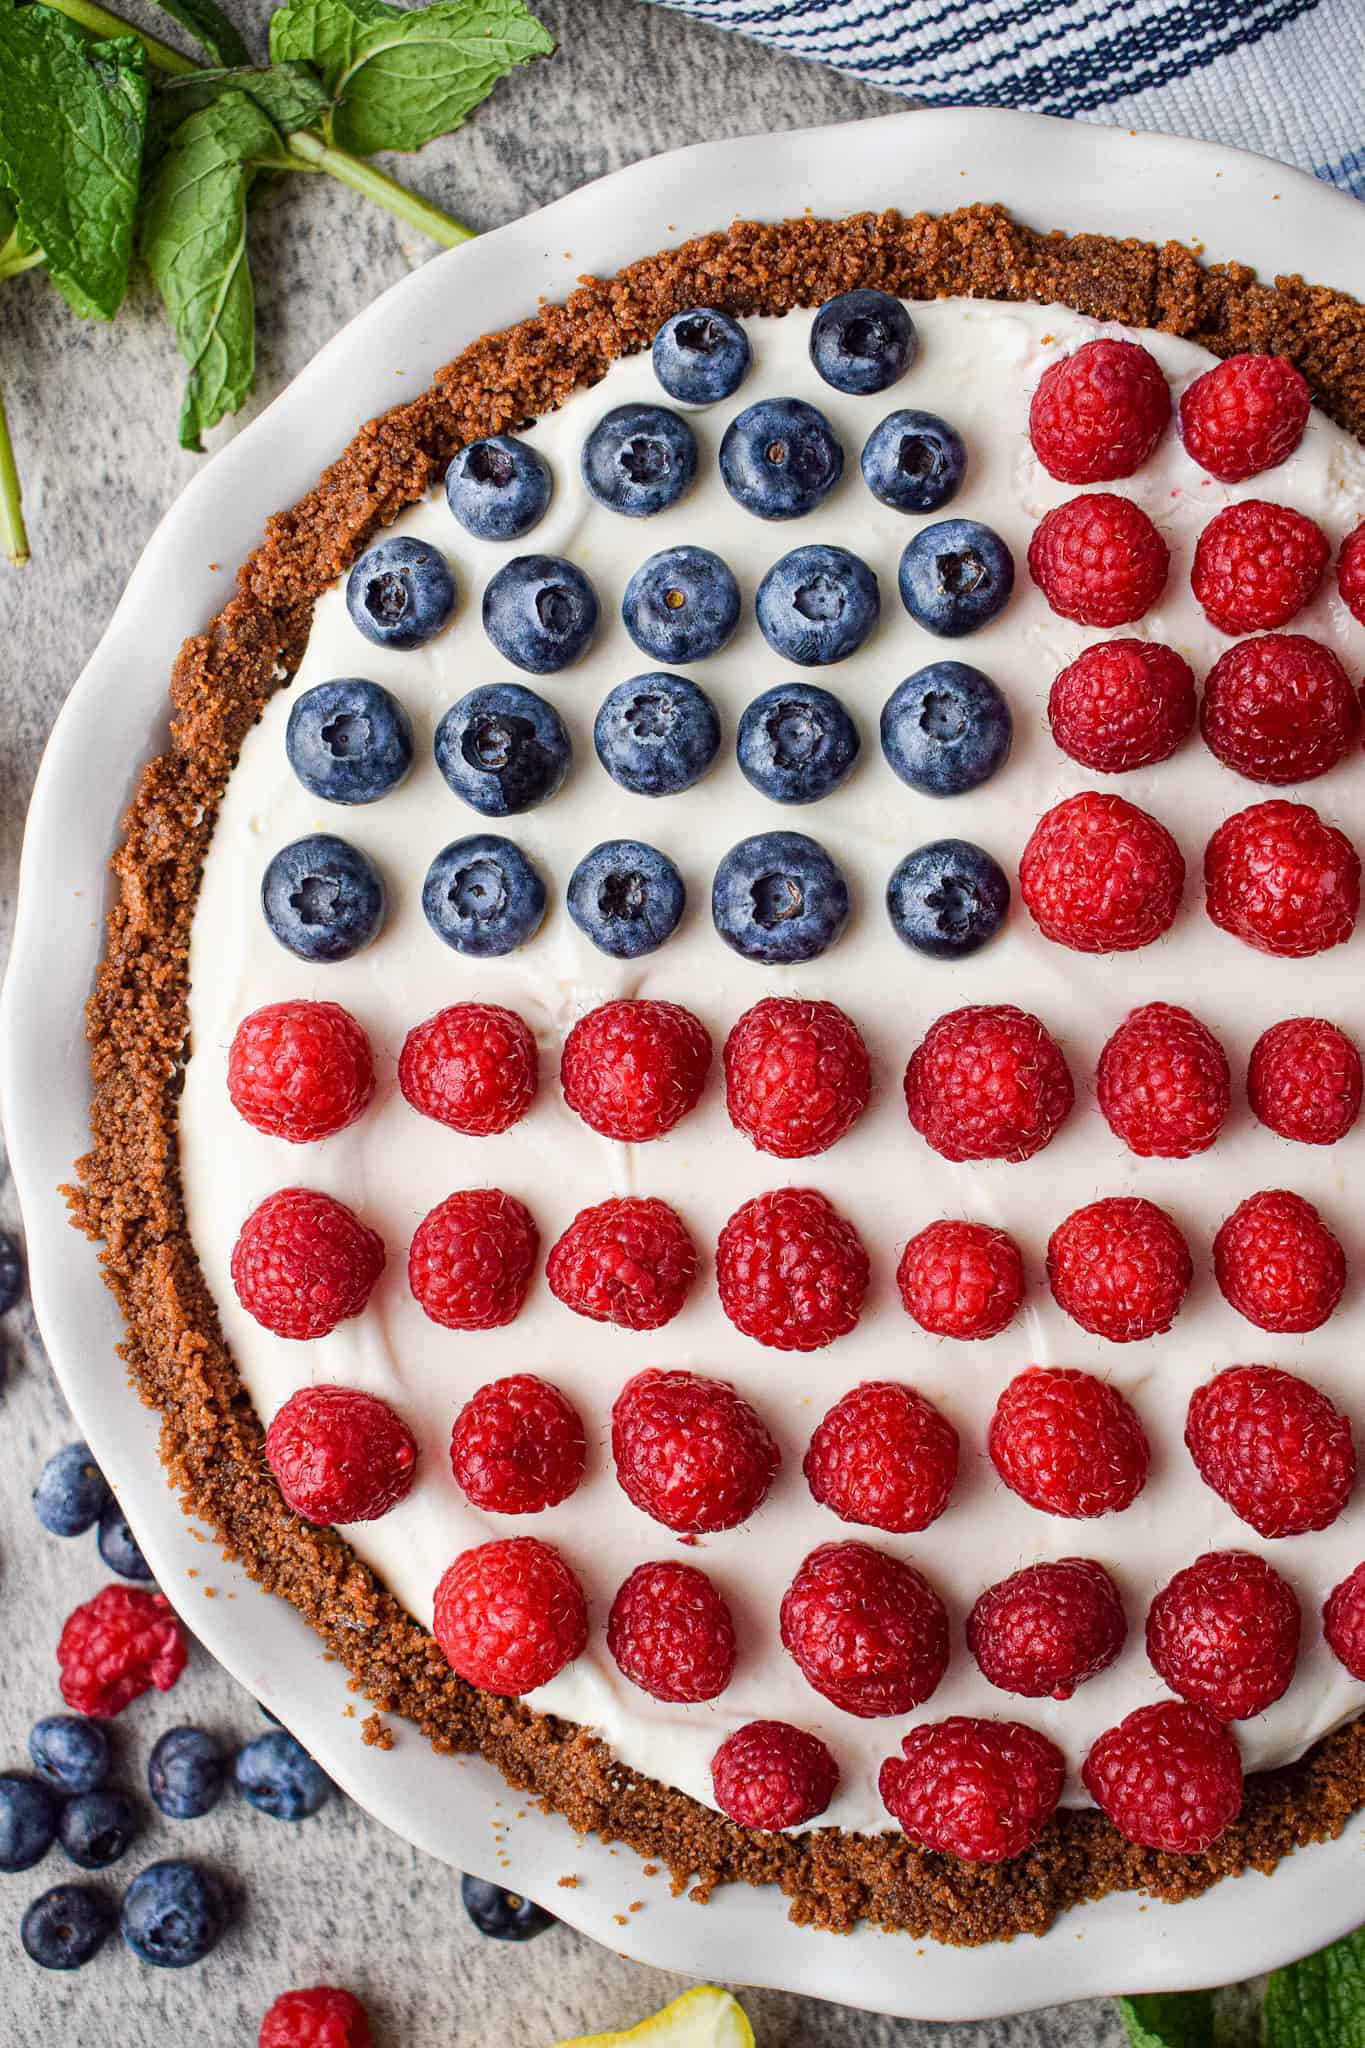 4th of July no bake pie with a graham cracker crust. The filling is white and the toppings are blueberries and raspberries, making it look like an American flag.